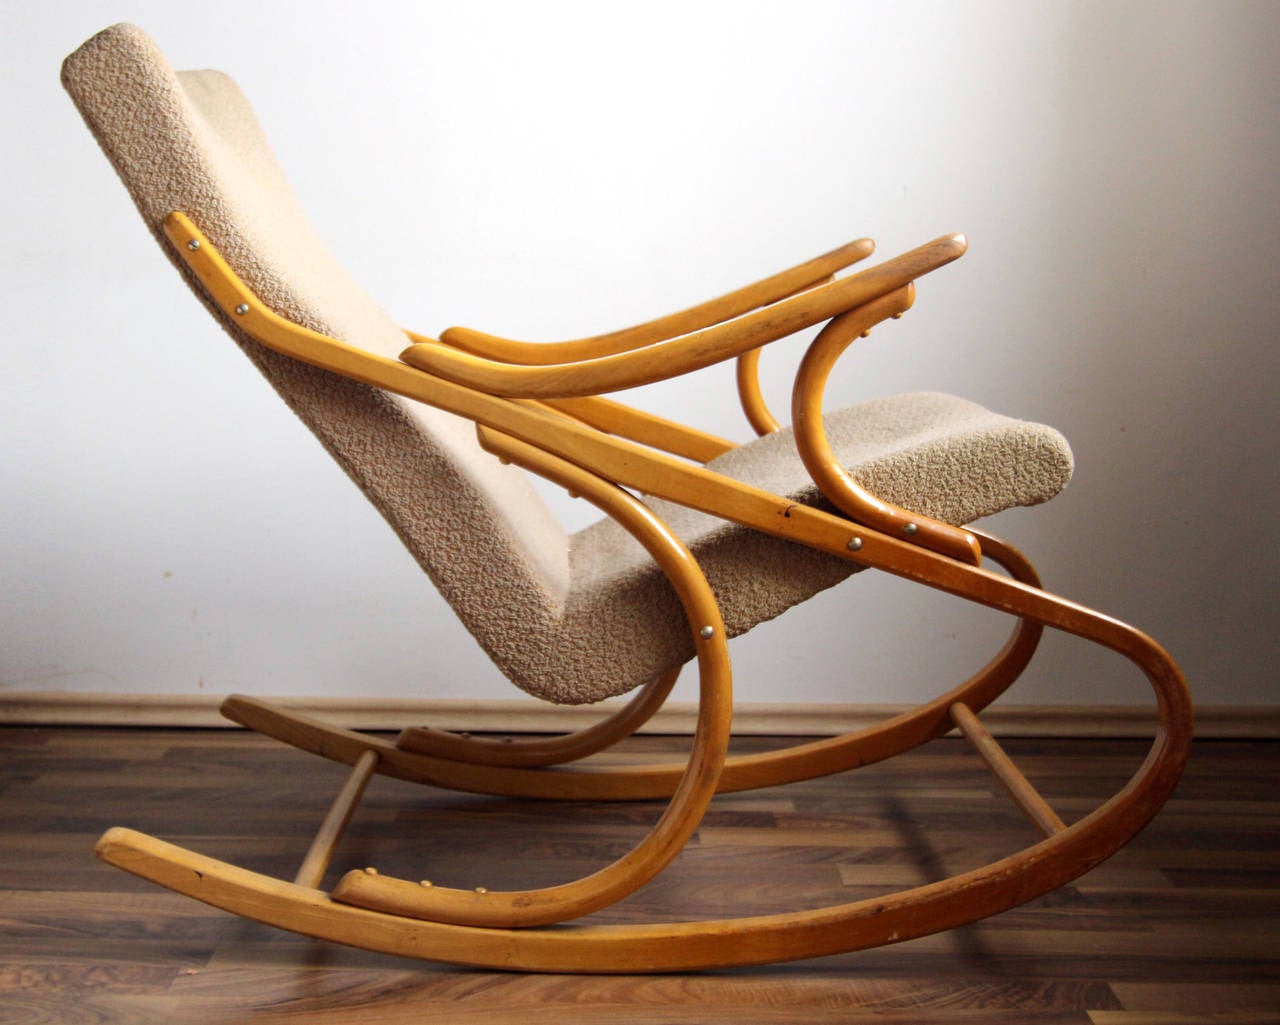 Midcentury rocking chair still unrestored 
made by TON (former Thonet factory)
delivery time 4-5 weeks